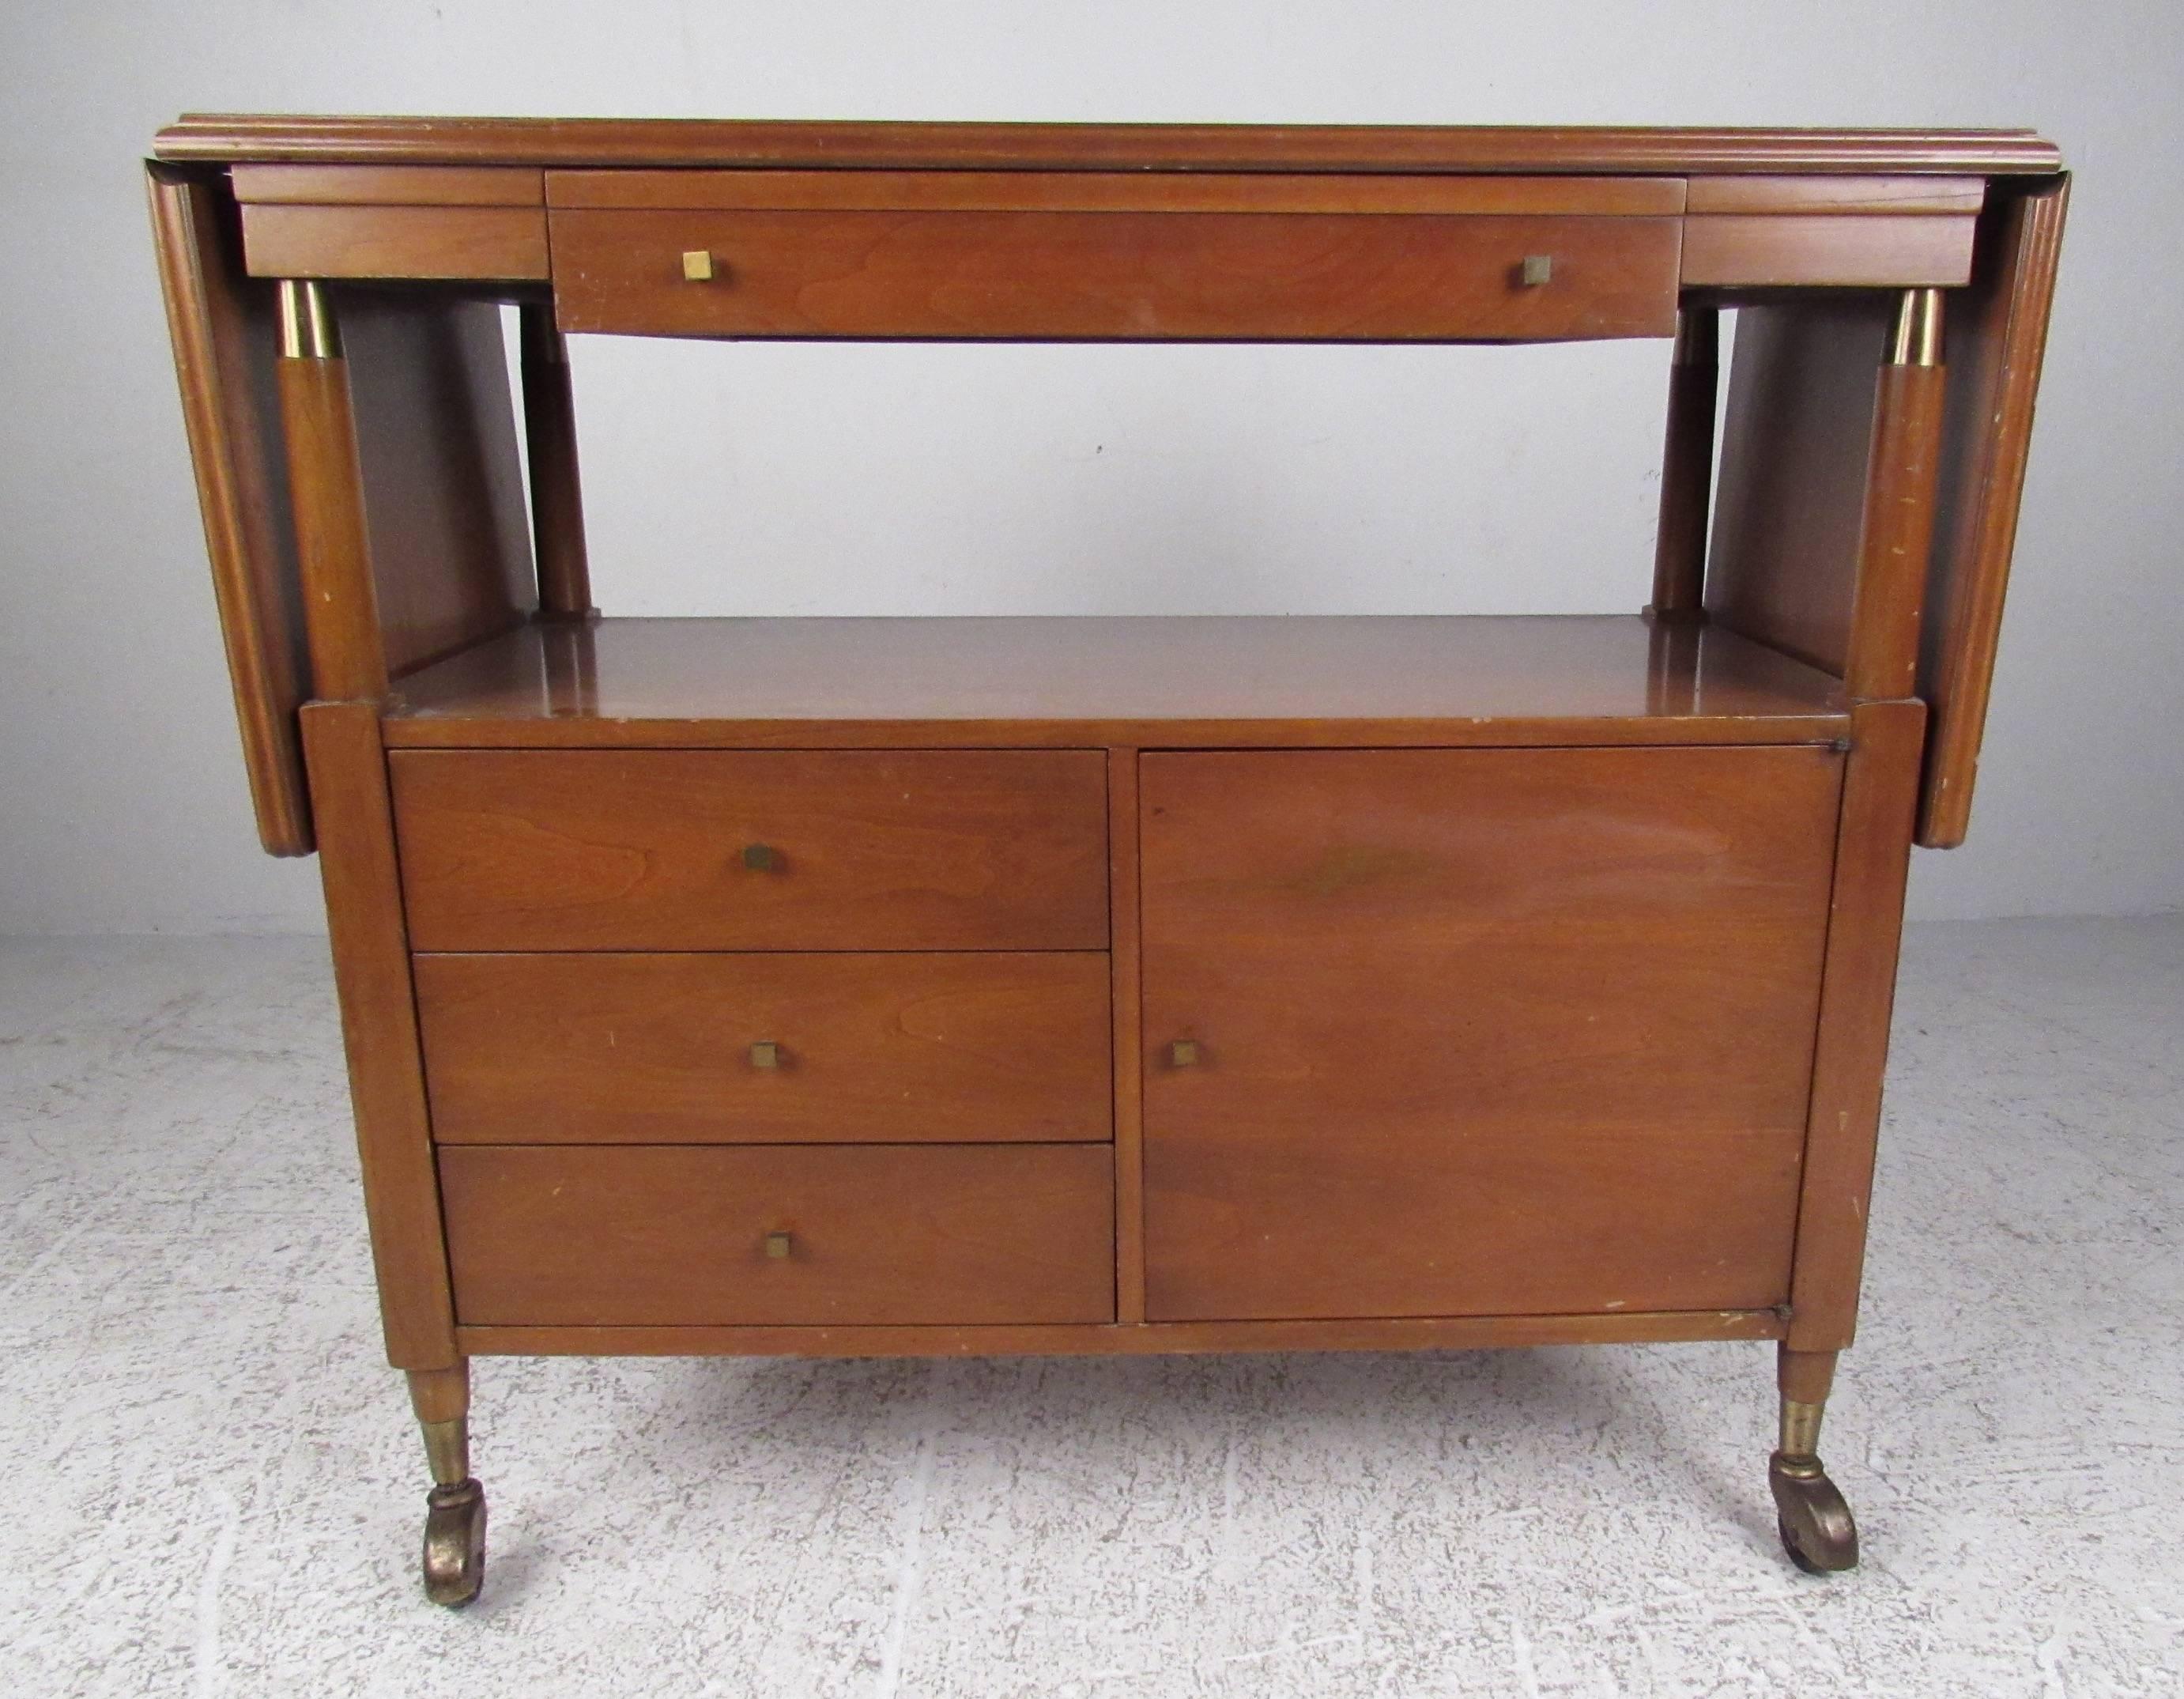 Nicely designed compact bar cart with ample storage options and extension leaves on both sides. A vintage modern piece with a rich walnut finish and unique brass pulls. Please confirm the item location (NY or NJ) with dealer.

Leaves open: 64 inches